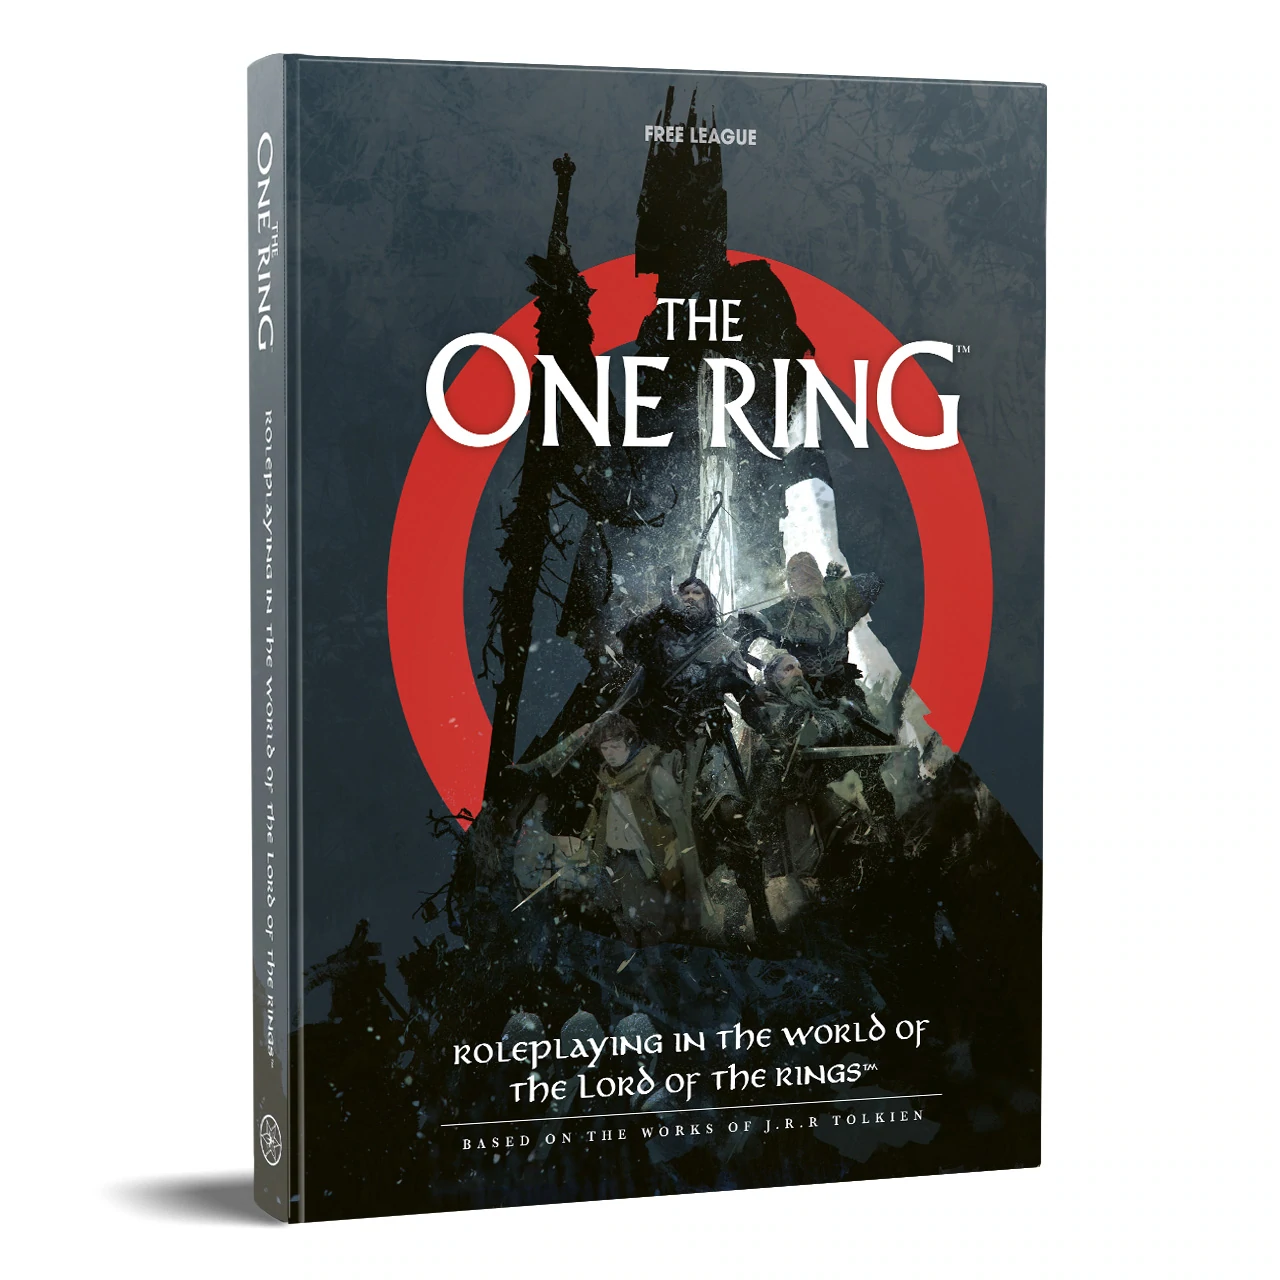 The Lord of the Rings, El Señor de los Anillos, The One Ring,